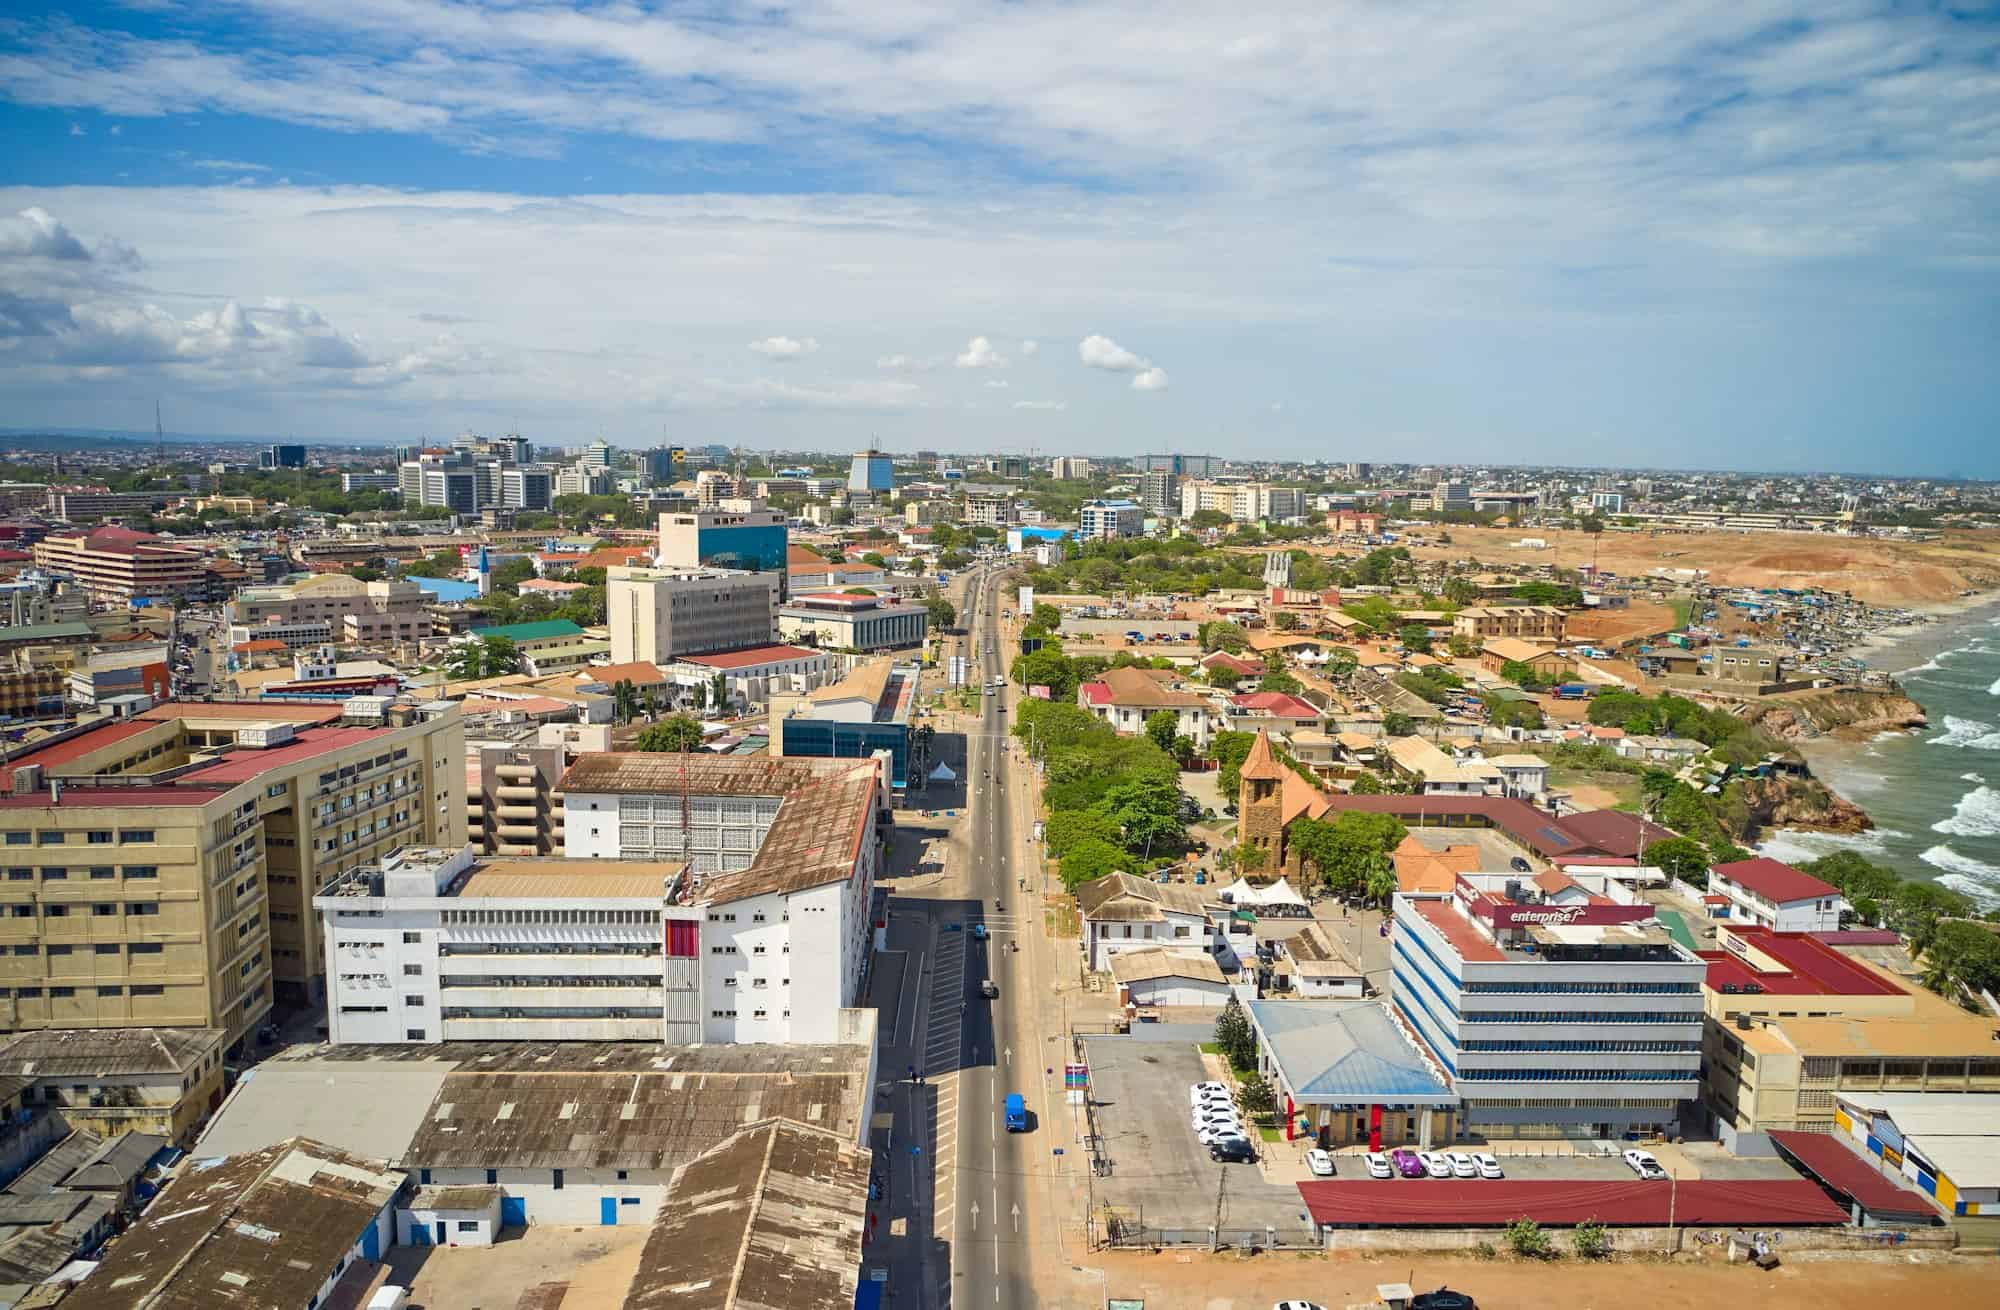 A traffic flow in Accra central, Ghana - Africa